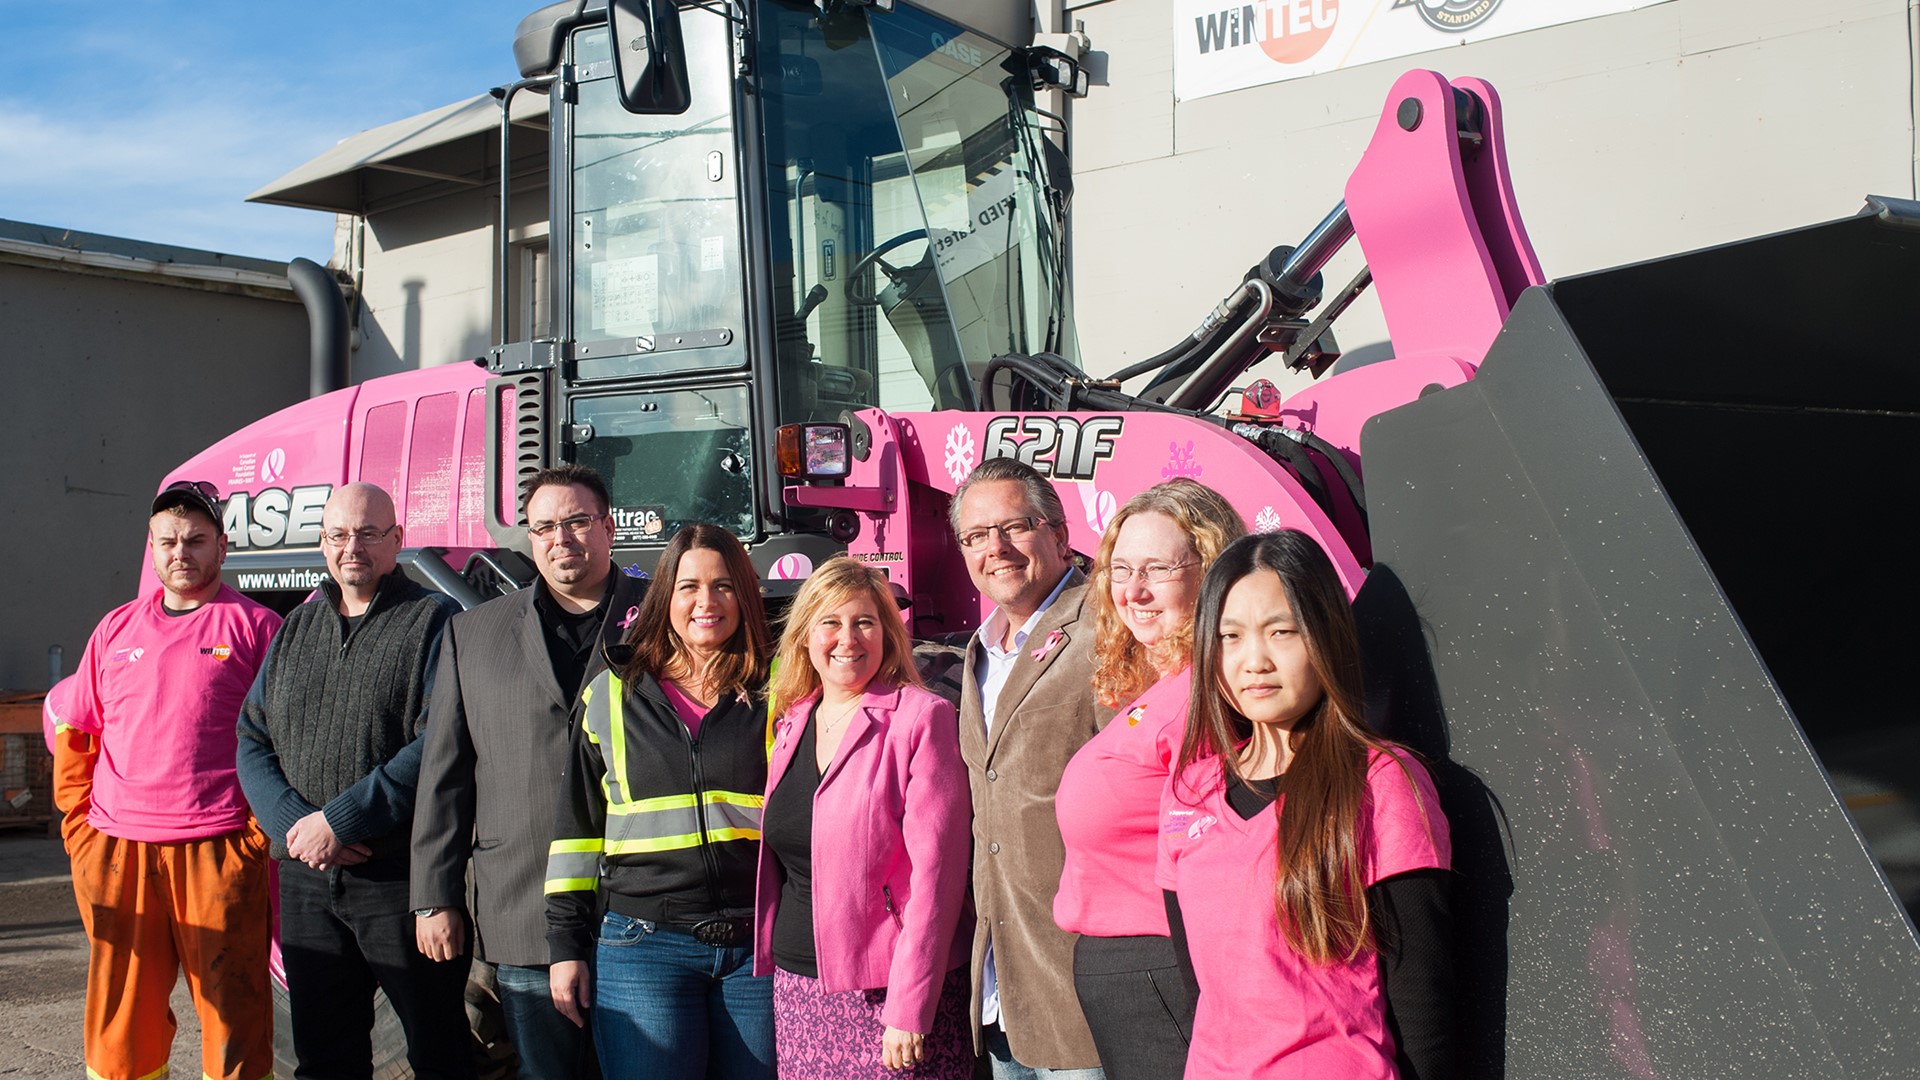 Representatives from Wintec, Canadian Breast Cancer Foundation, and Hitrac